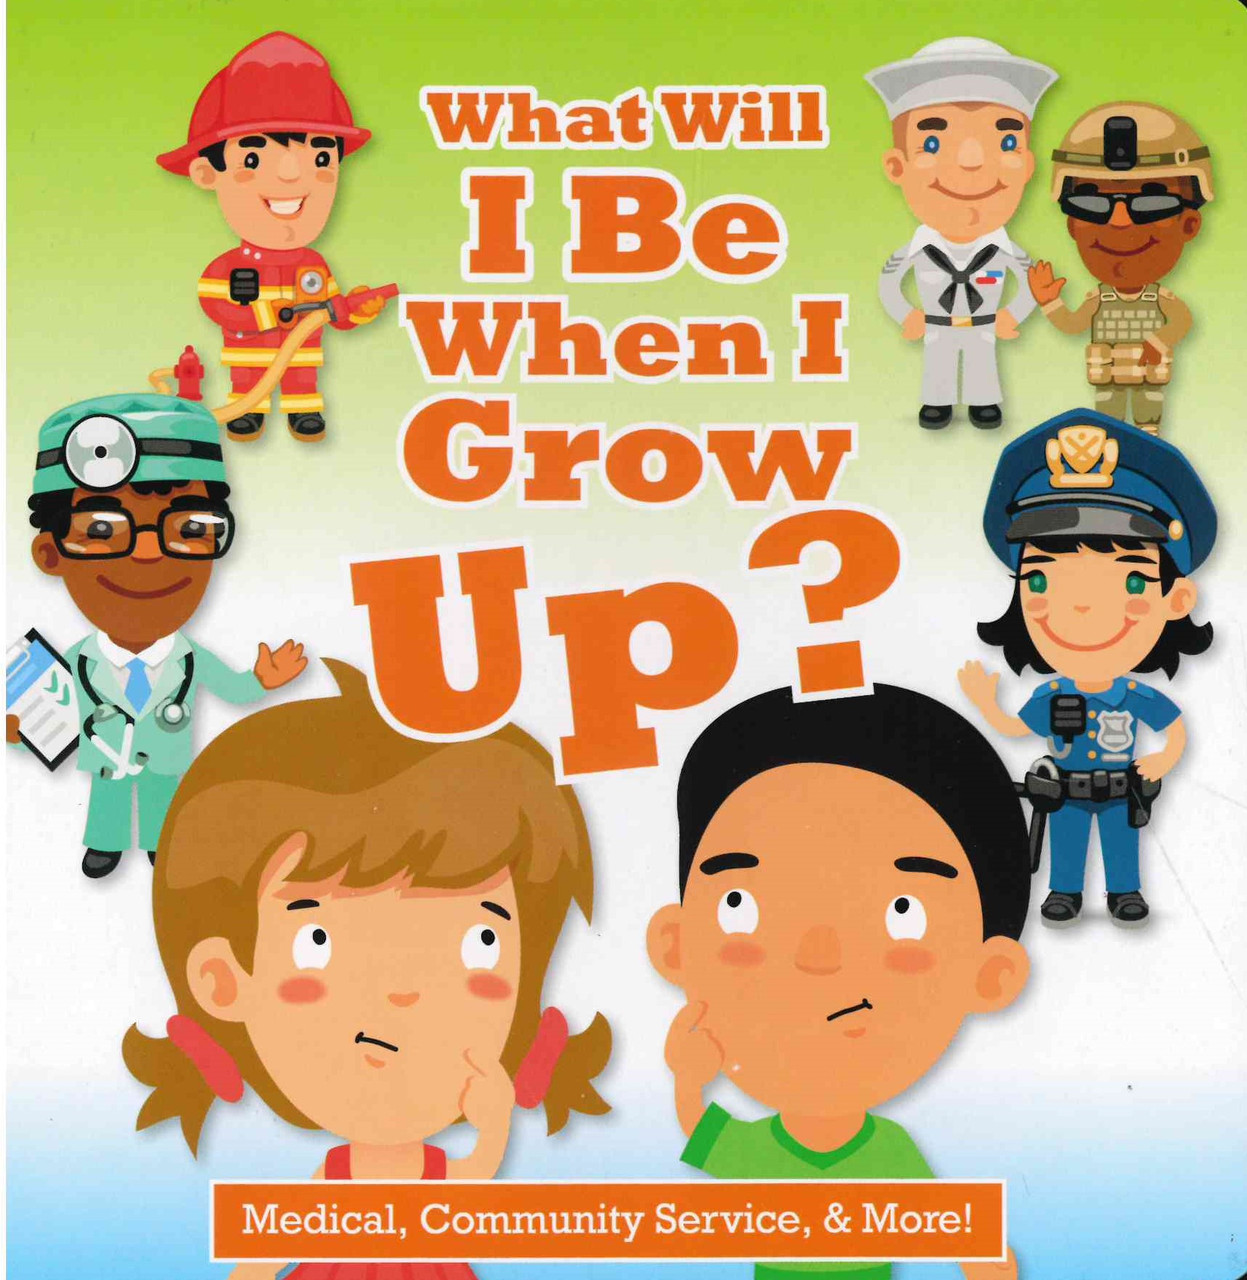 Growing Up Poster